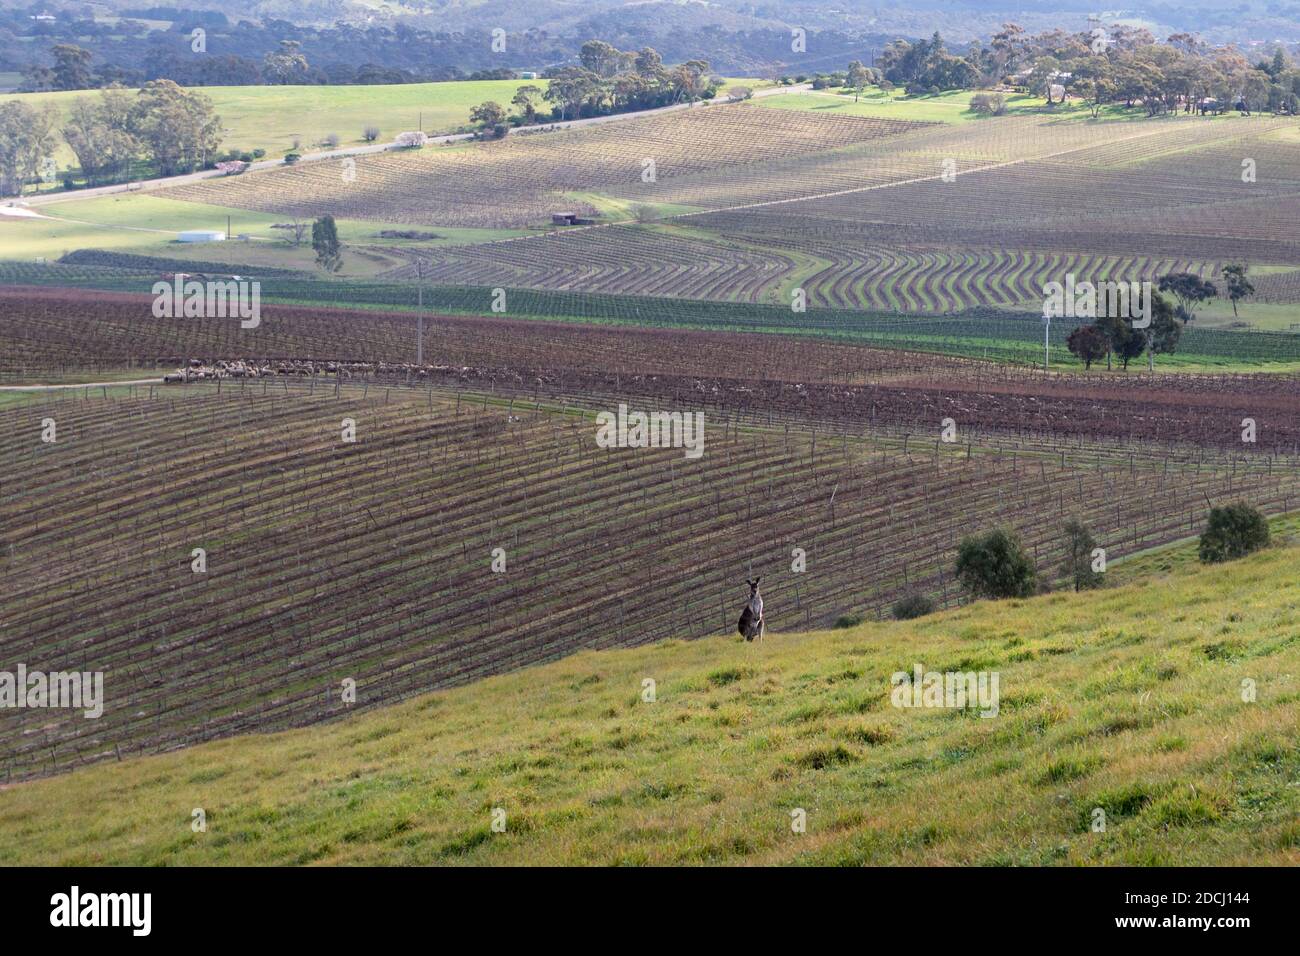 Iconic Australian wild kangaroo in the middle of the vineyards. Wine making area at Clare valley, South Australia Stock Photo